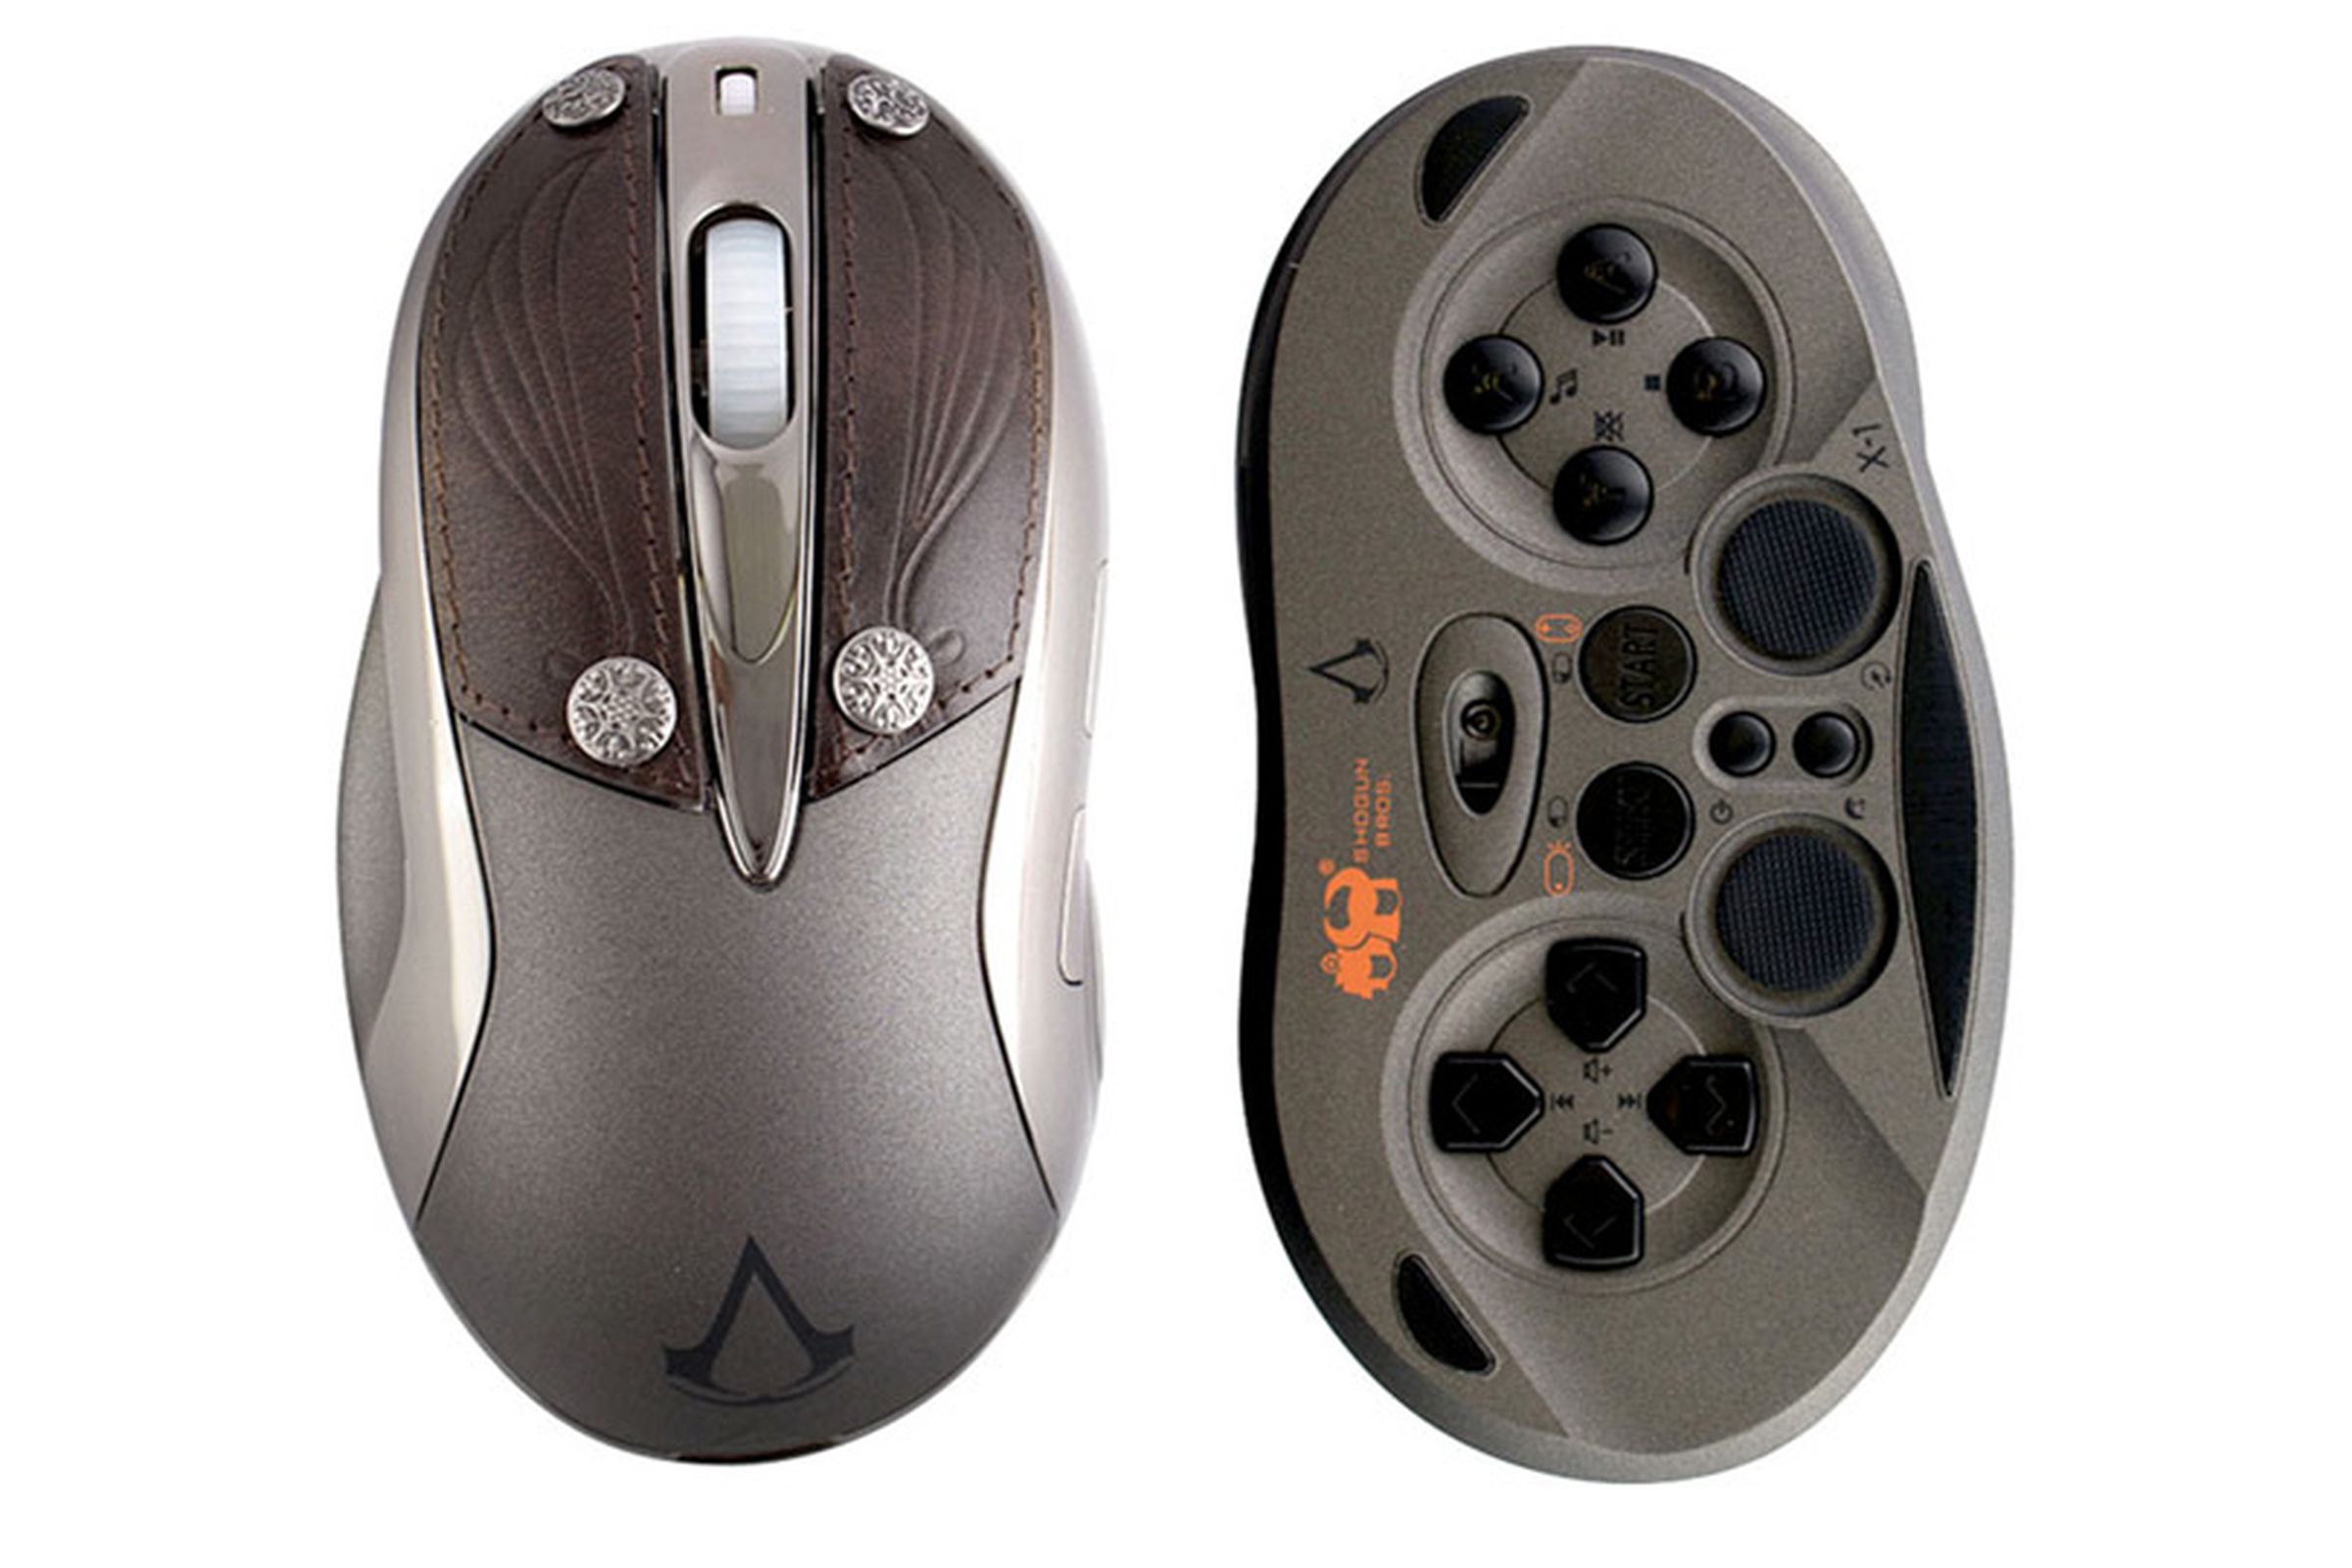 Chameleon X-1 Assassins Creed gamepad mouse